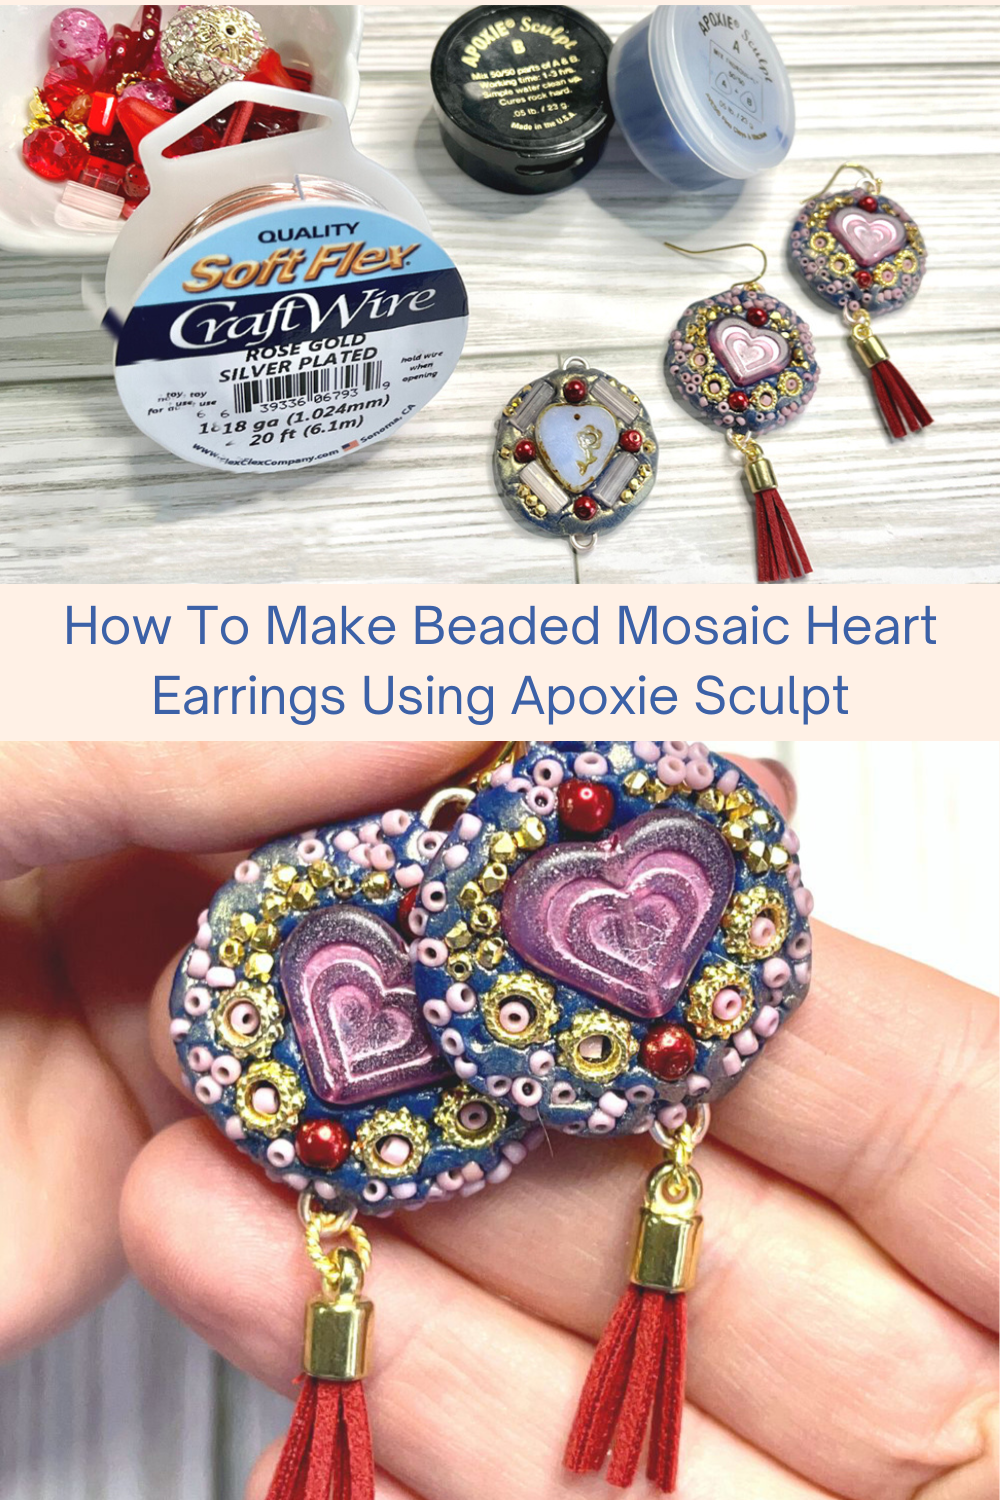 How To Make Beaded Mosaic Heart Earrings Using Apoxie Sculpt Collage